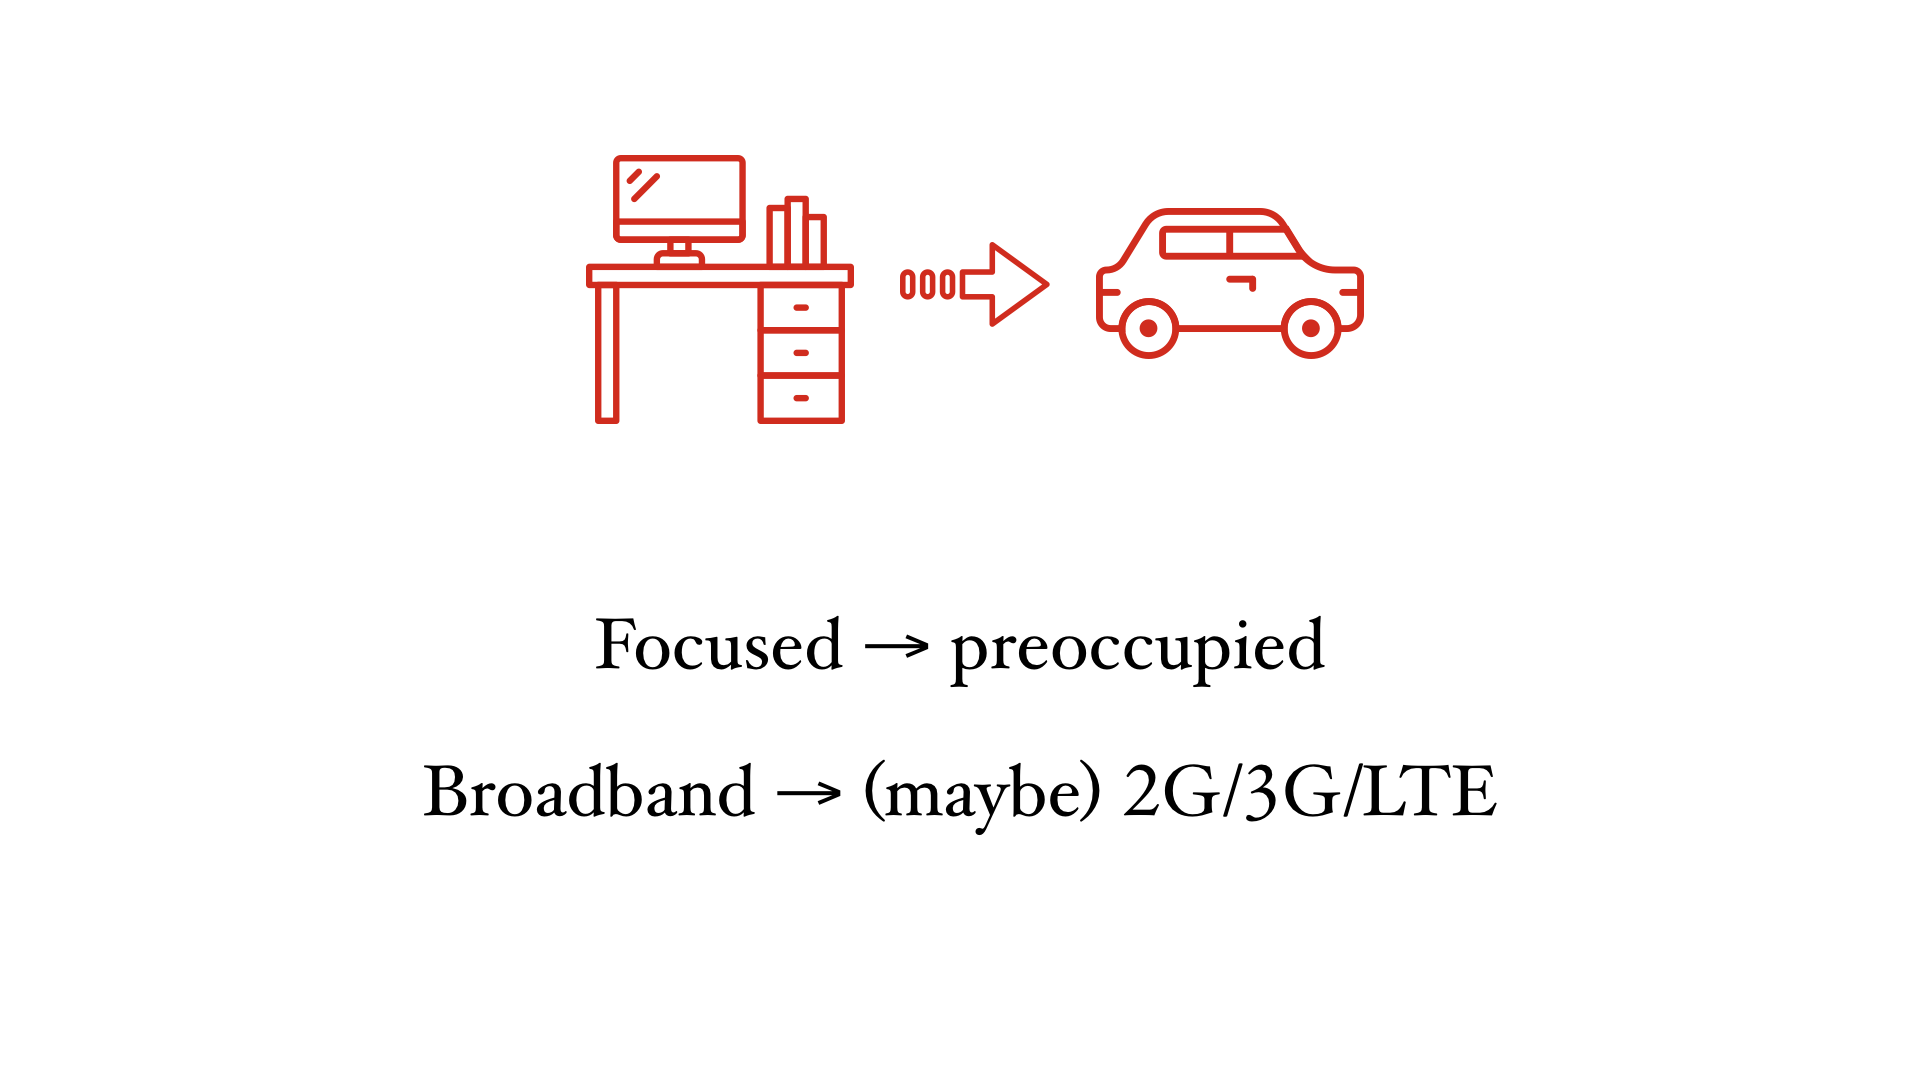 Illustration of a desk and a car. Text below reads "Focus → preoccupied" and "Broadband → (maybe) 2G/3G/LTE"